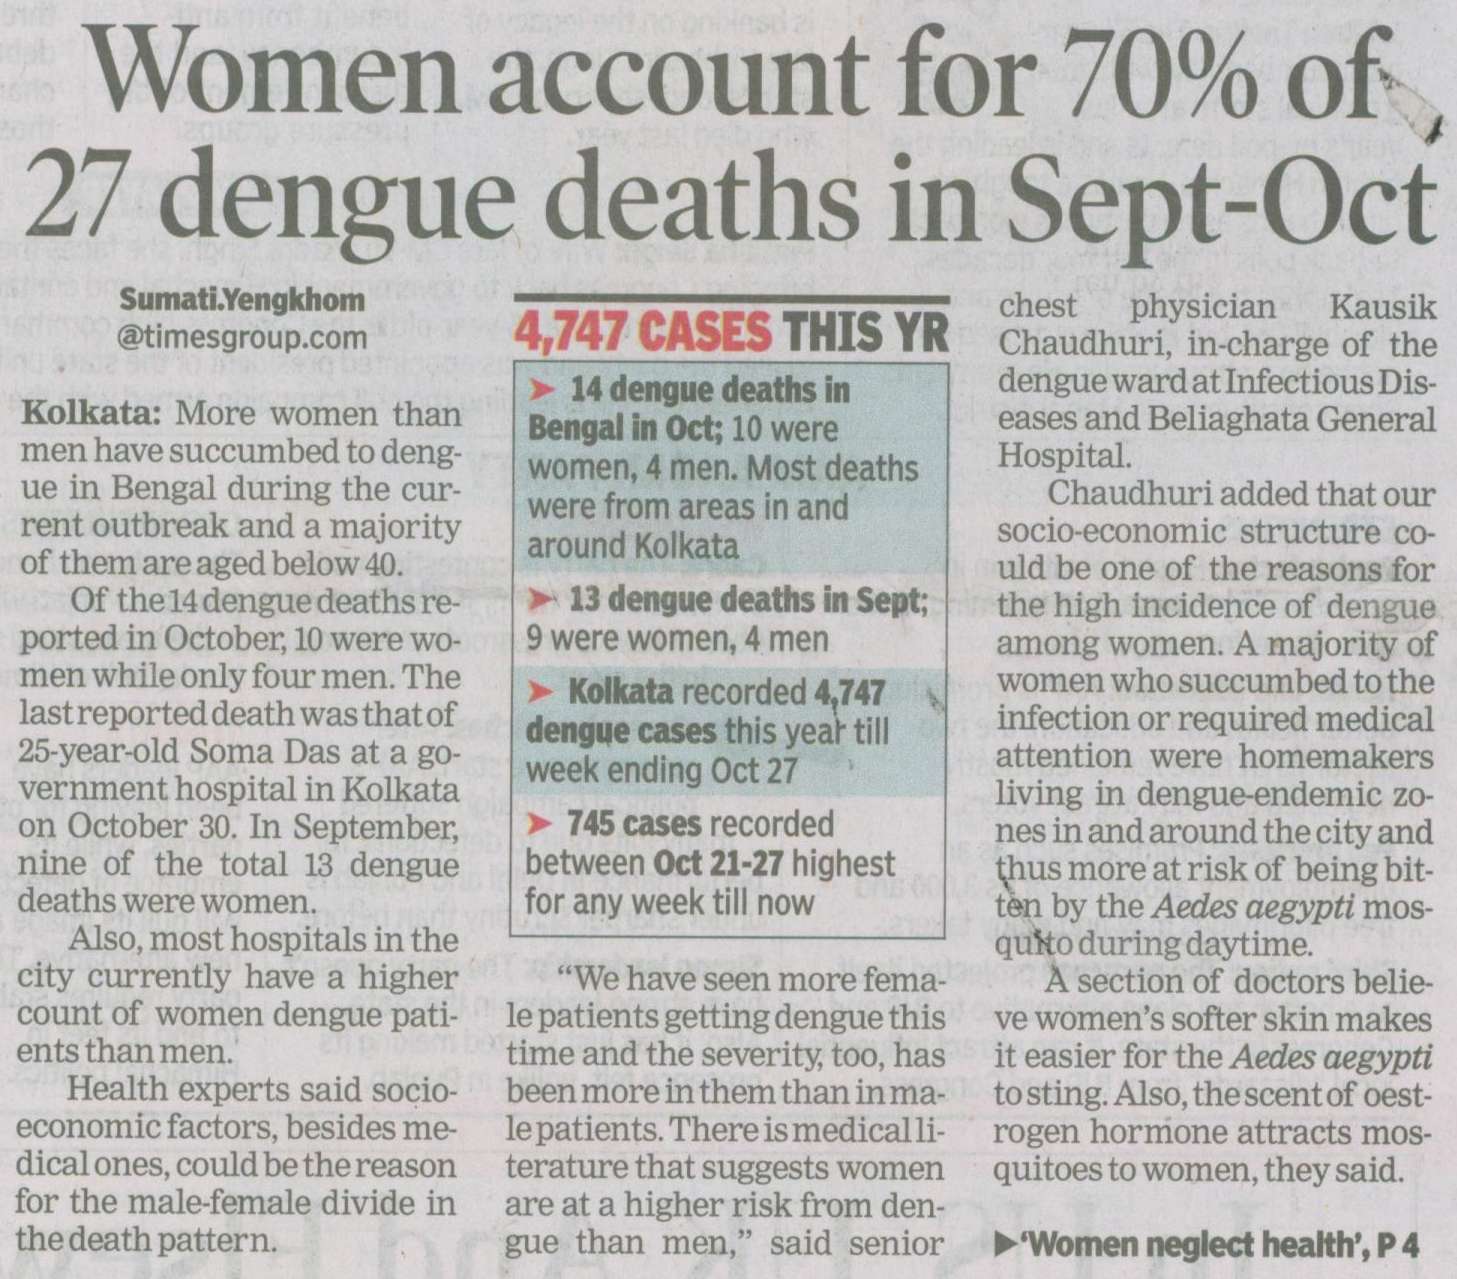 Women account for 70% of 27 dengue deaths in Sept-Oct & Women neglect health due to socio-economic reasons, say doctors